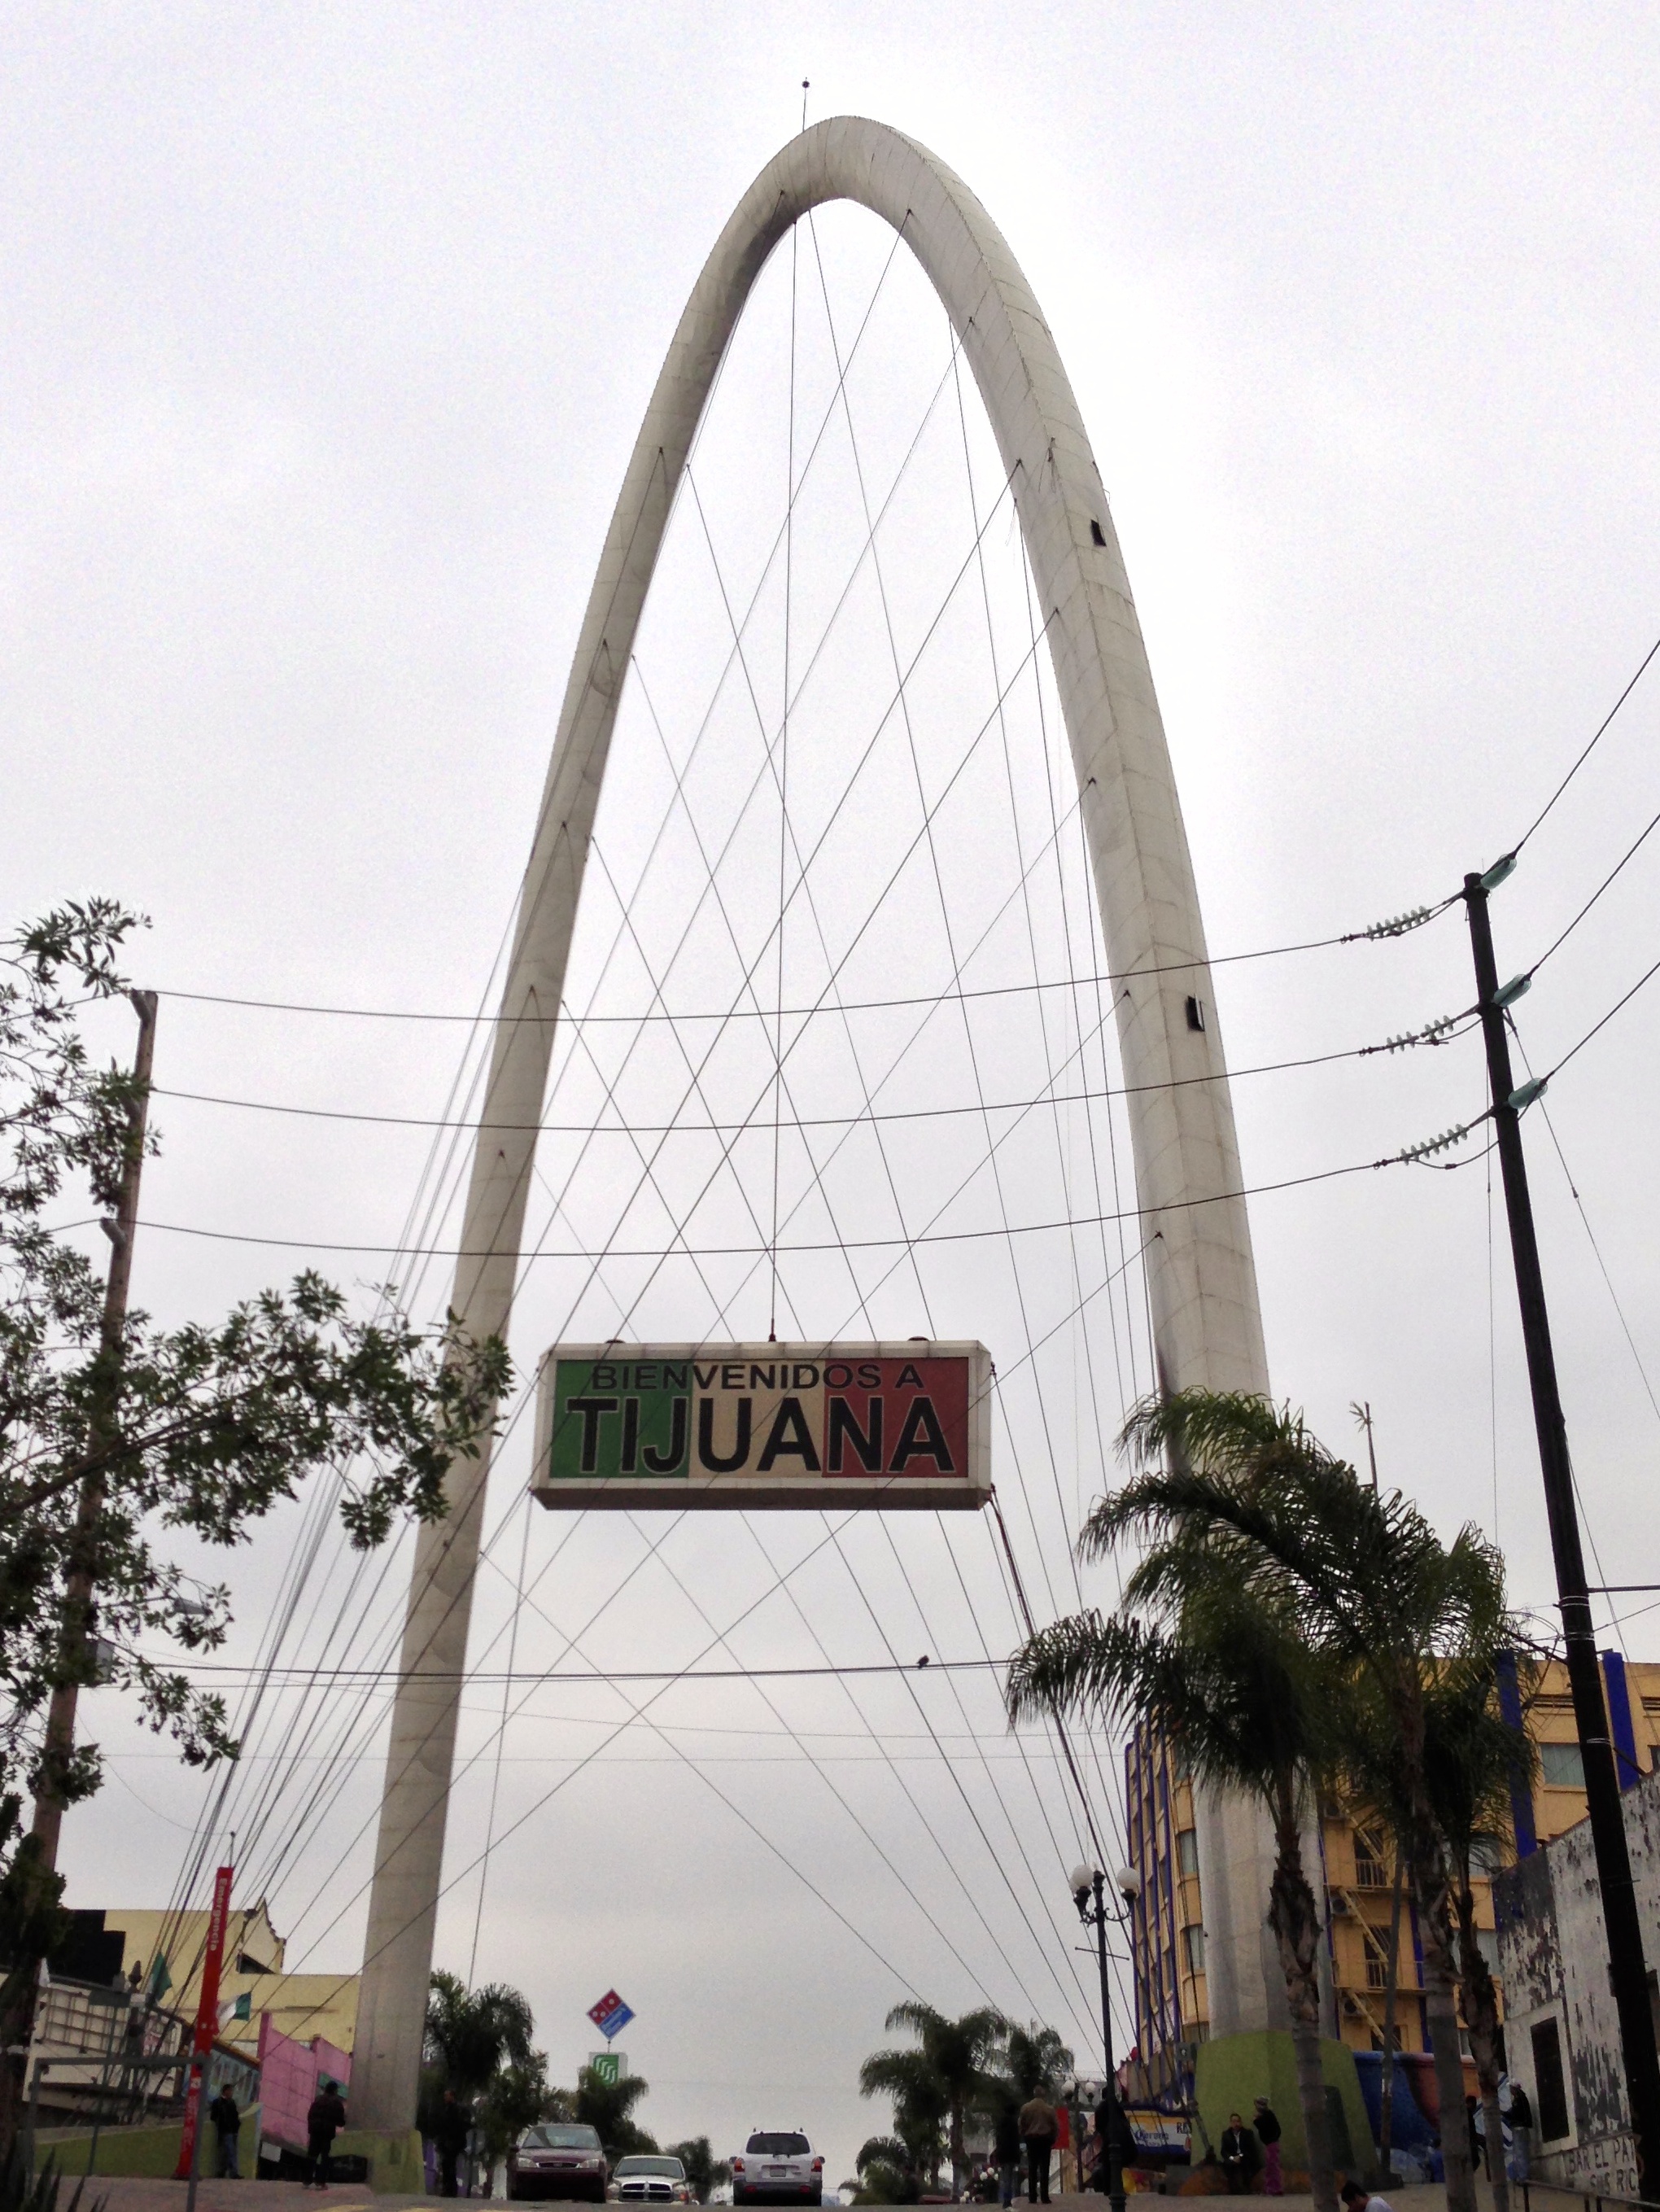 The Welcome Arch in the Tourist area in Tijuana